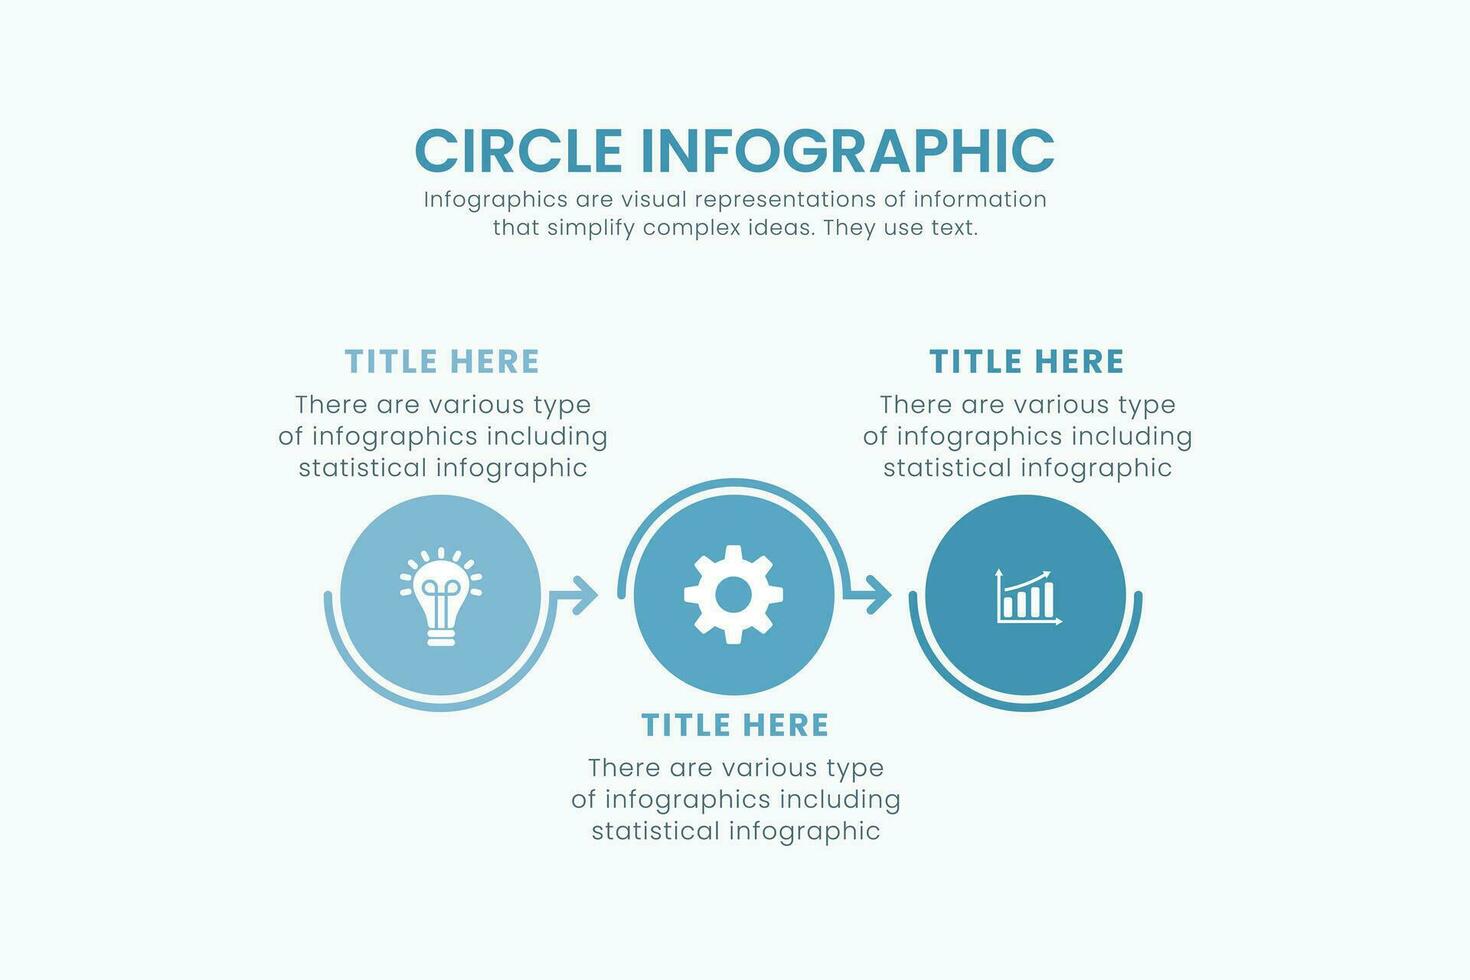 Minimal business circle infographic design template for cycling diagram. presentation and round chart. Business concept with 3 stages. Modern flat vector illustration for data visualization.